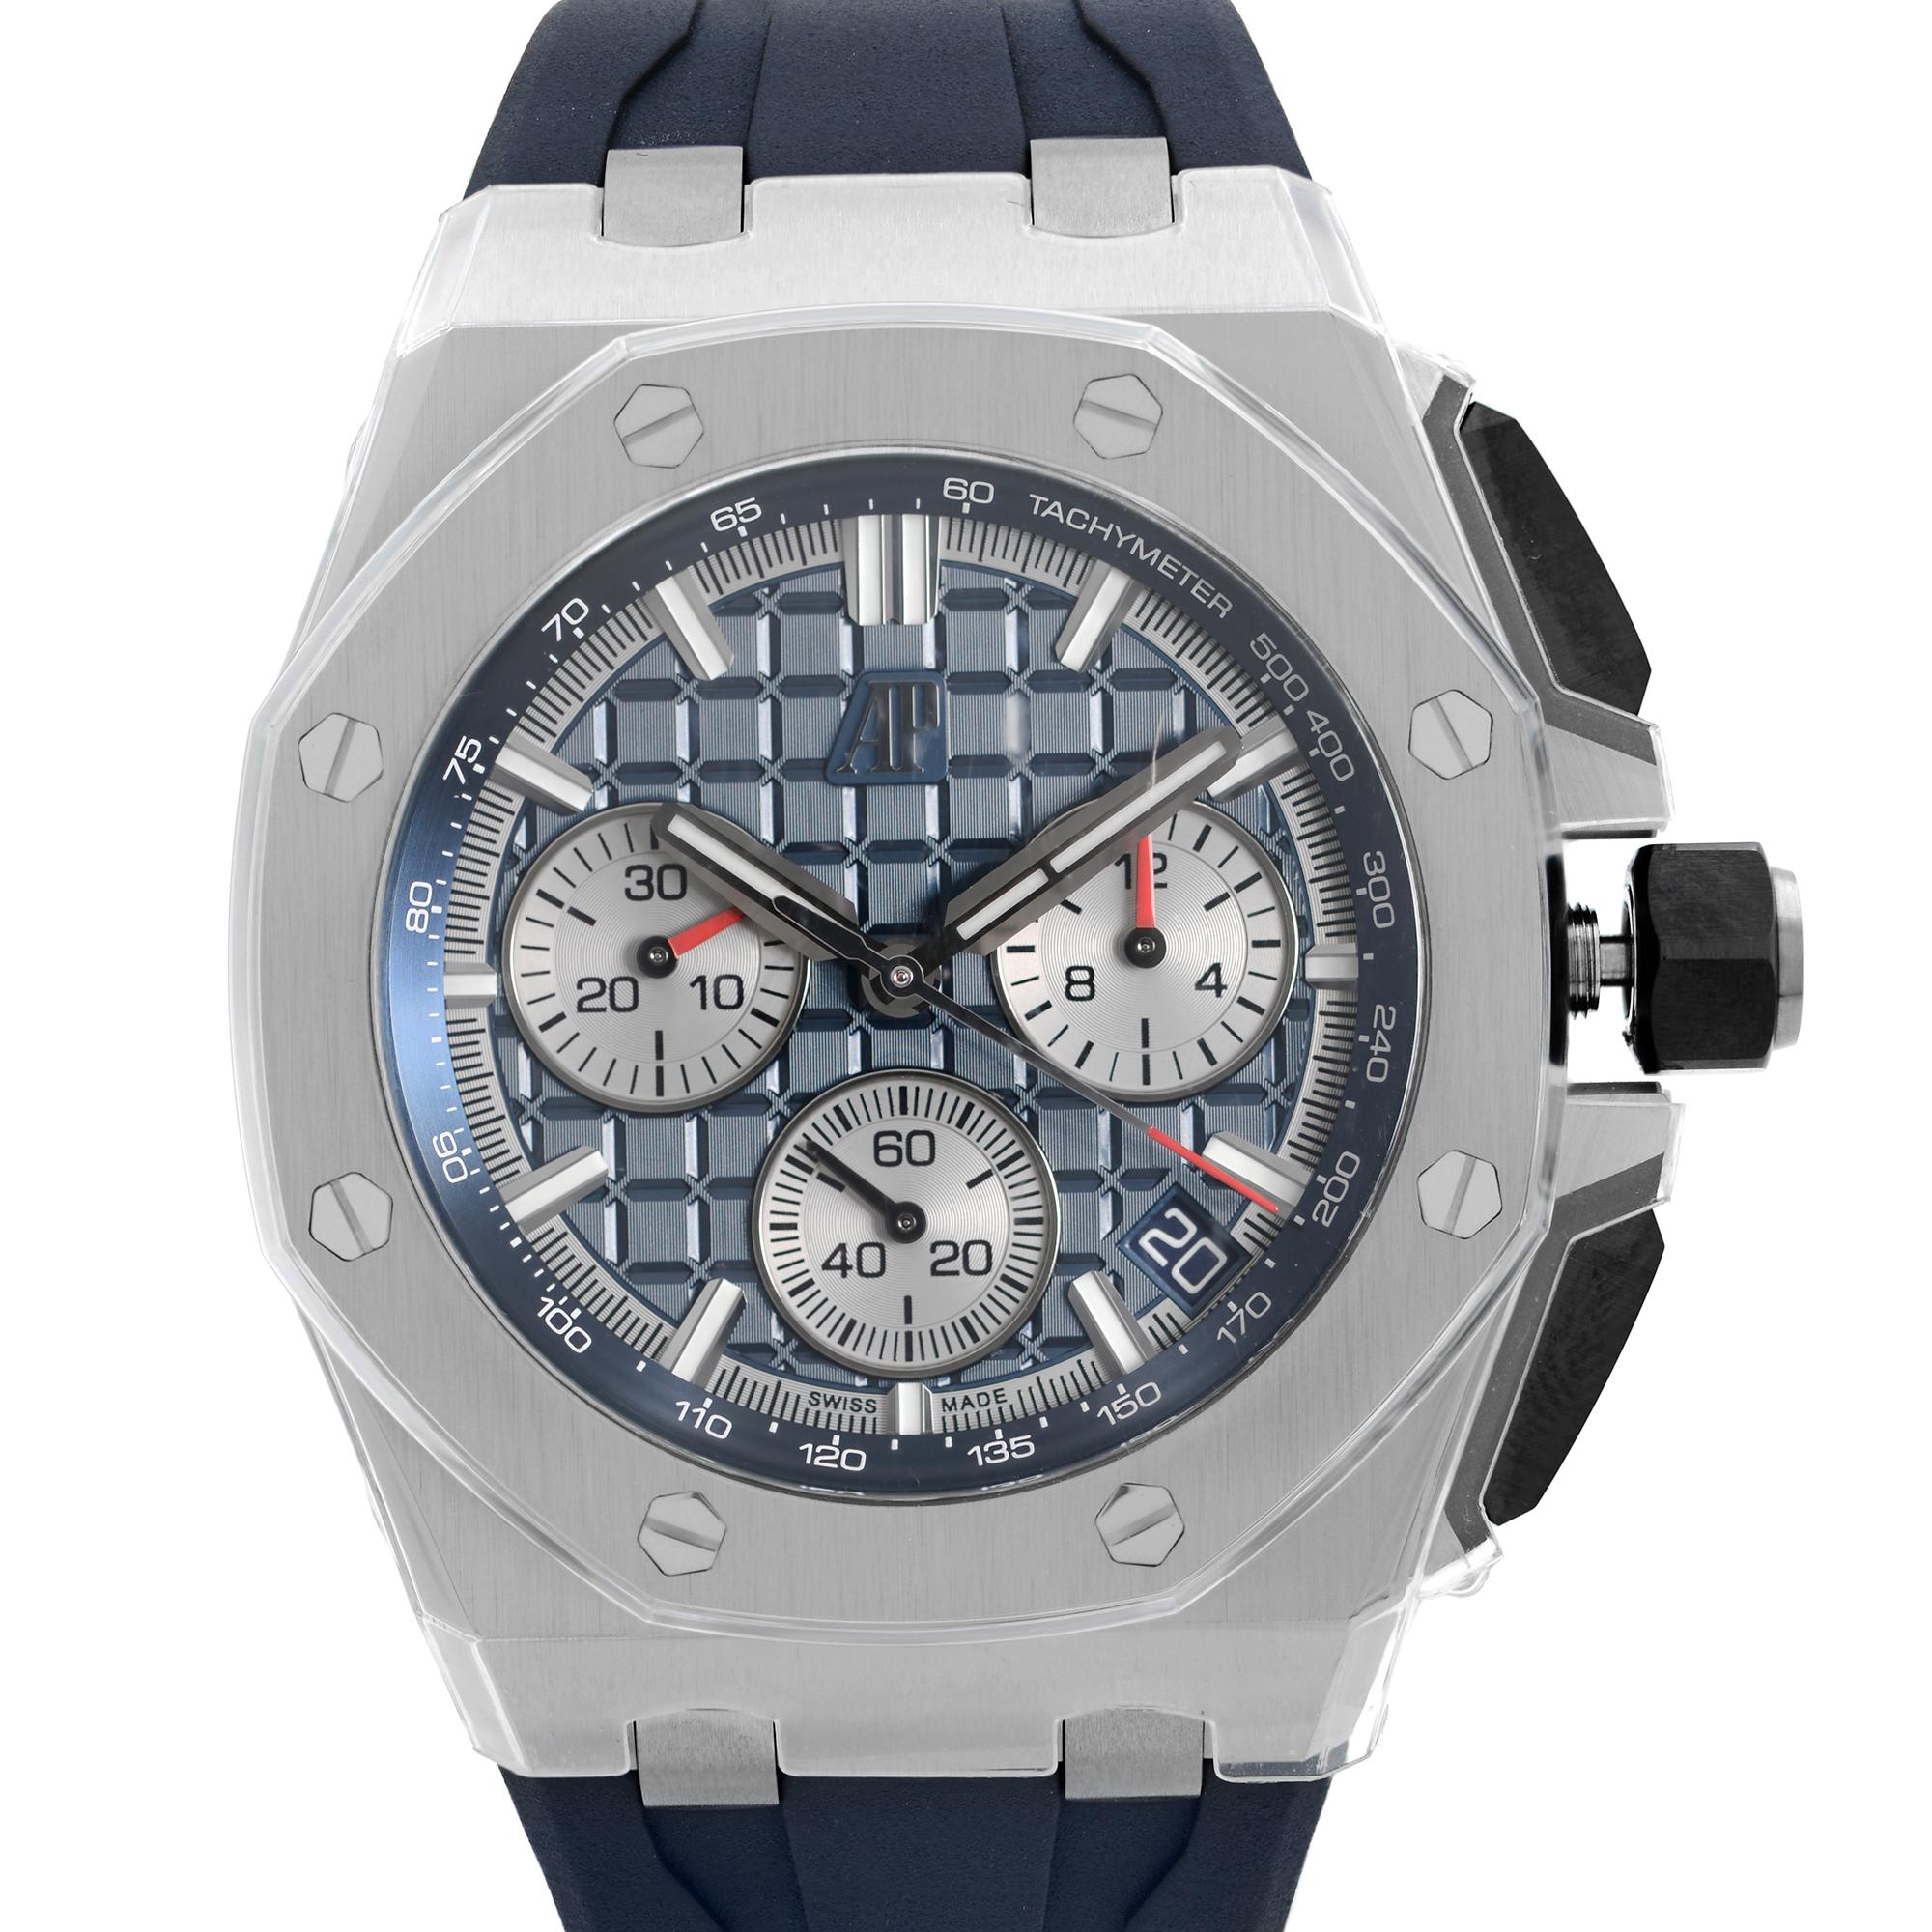 Display Model Audemars Piaget Royal Oak Offshore Titanium Blue Dial Watch 26420TI.OO.A027CA.01. This Beautiful Timepiece is Powered by Mechanical (Automatic) Movement And Features: Titanium Case with a Blue Rubber Buckle Strap. Fixed Octagonal